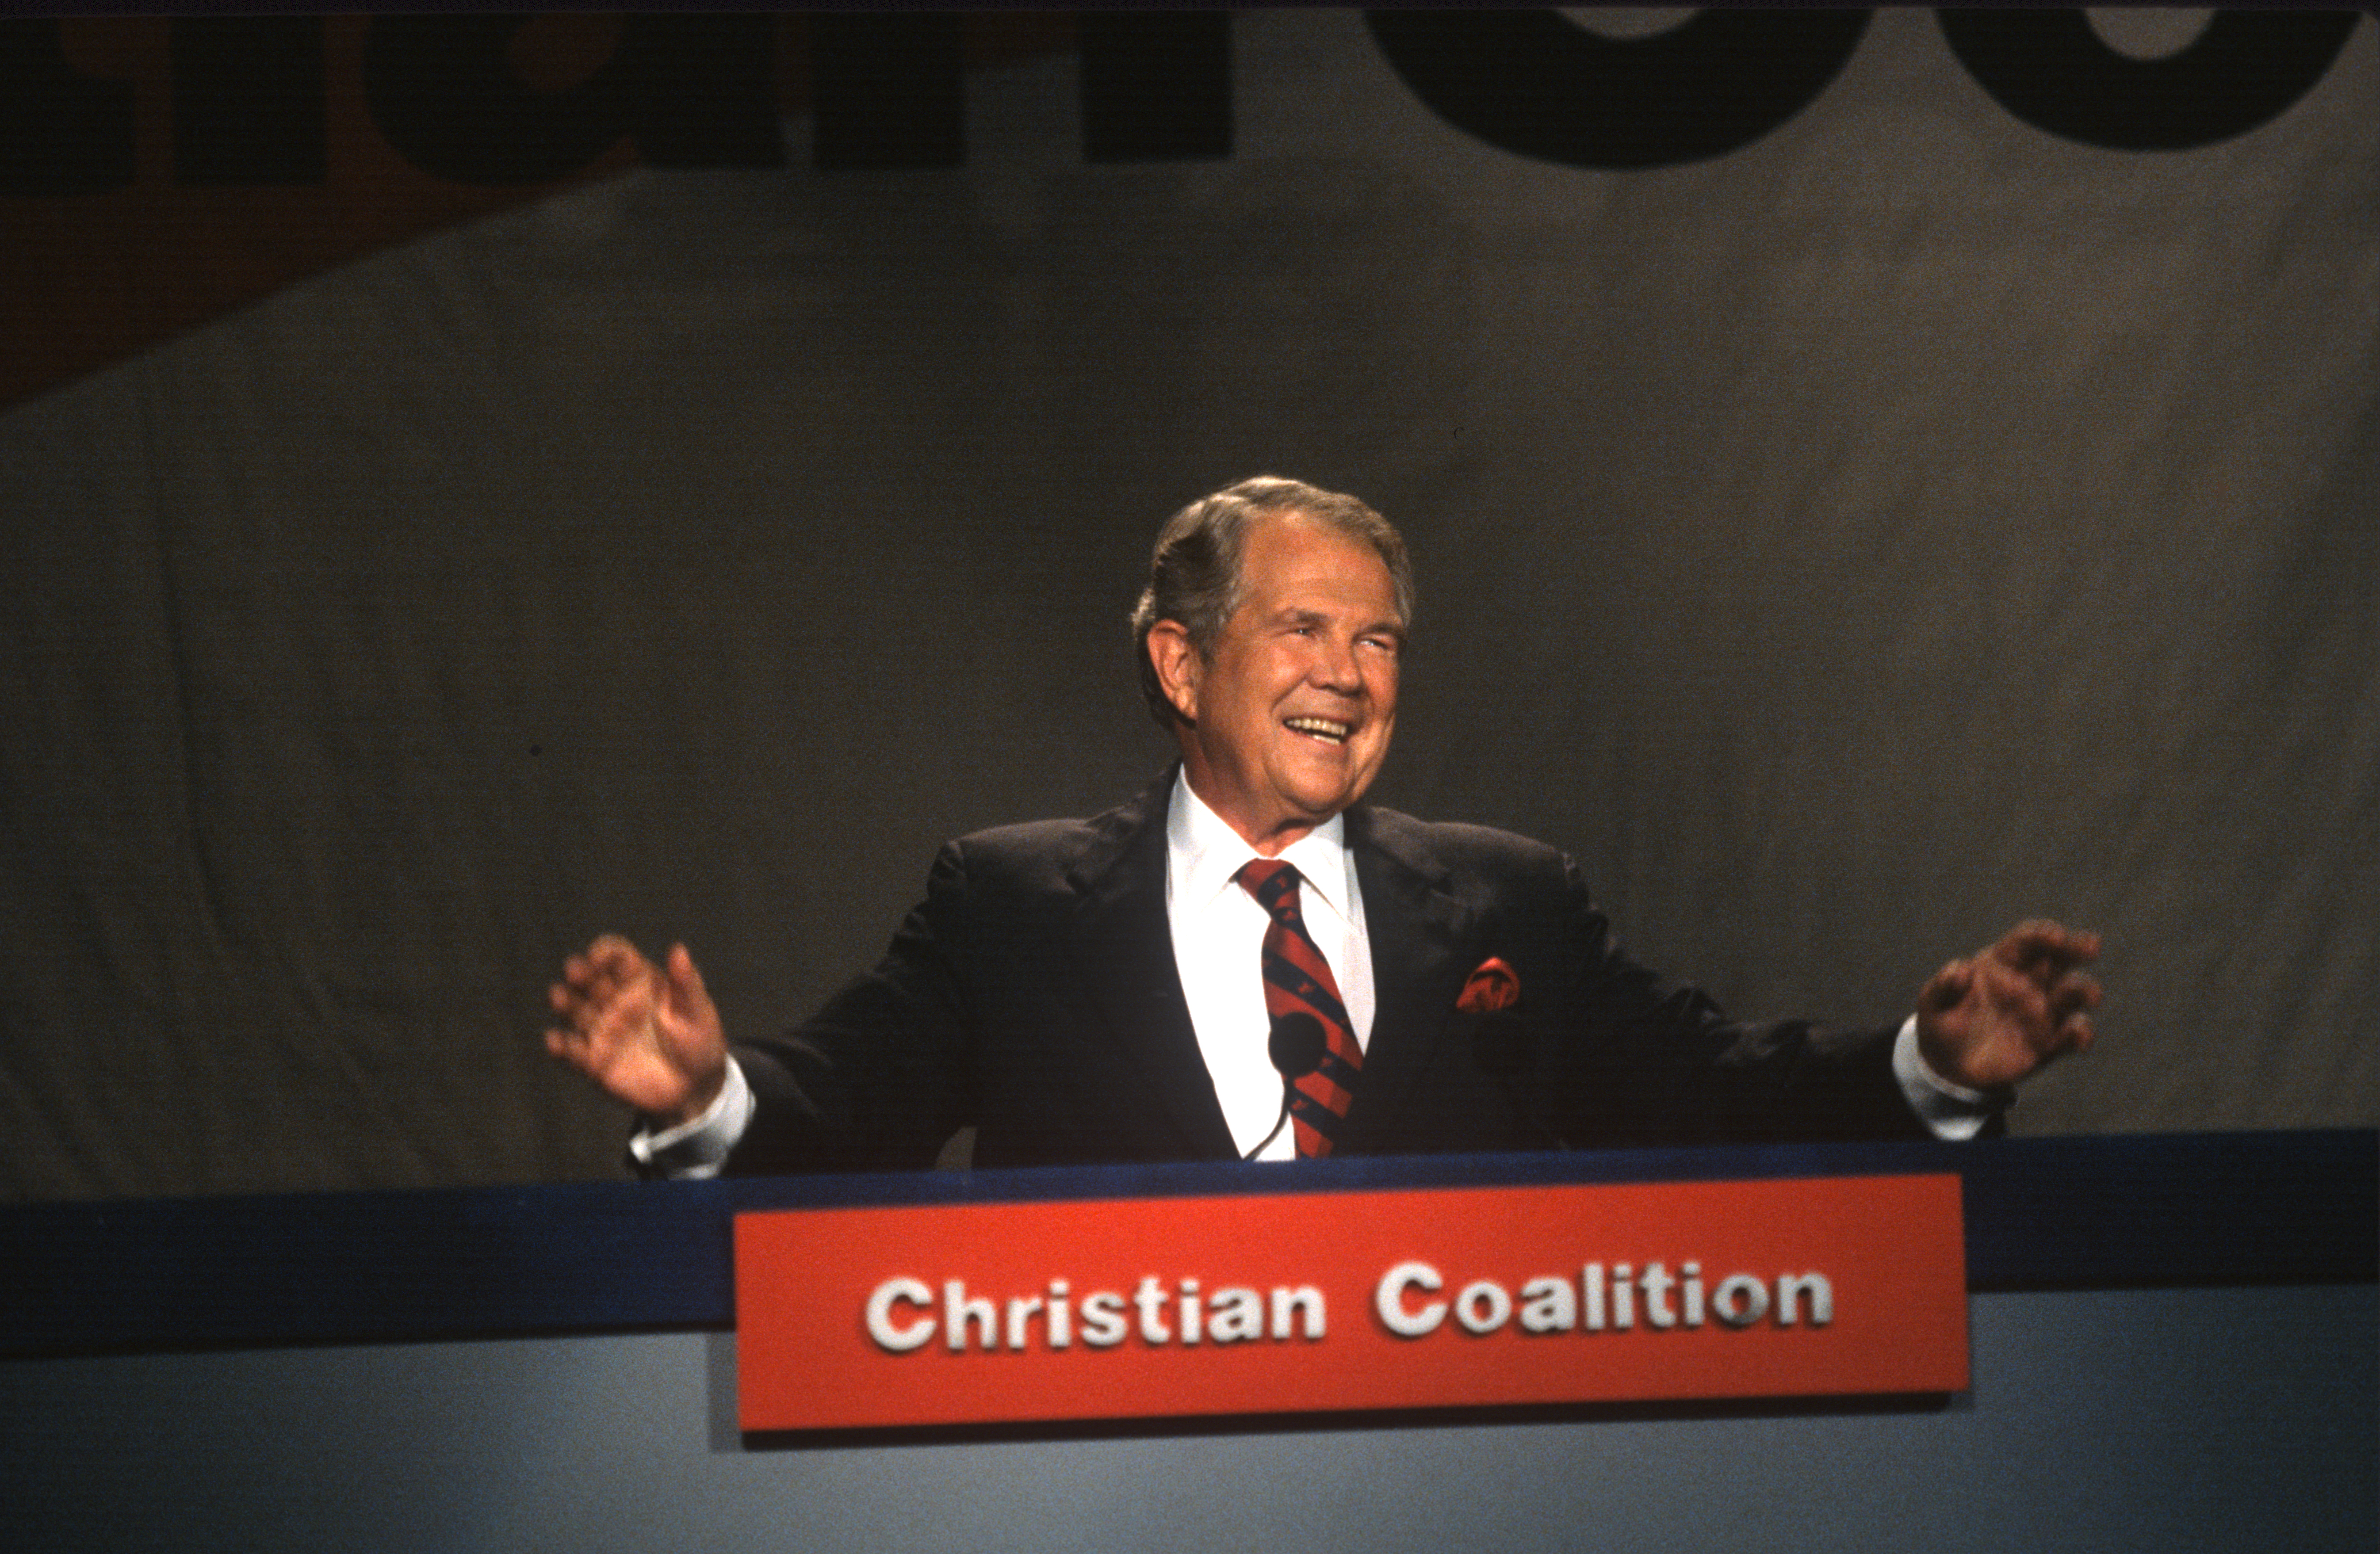 Pat Robertson speaking at the Christian Coalition's annual meeting on September 9, 1995, in Washington D.C. | Source: Getty Images